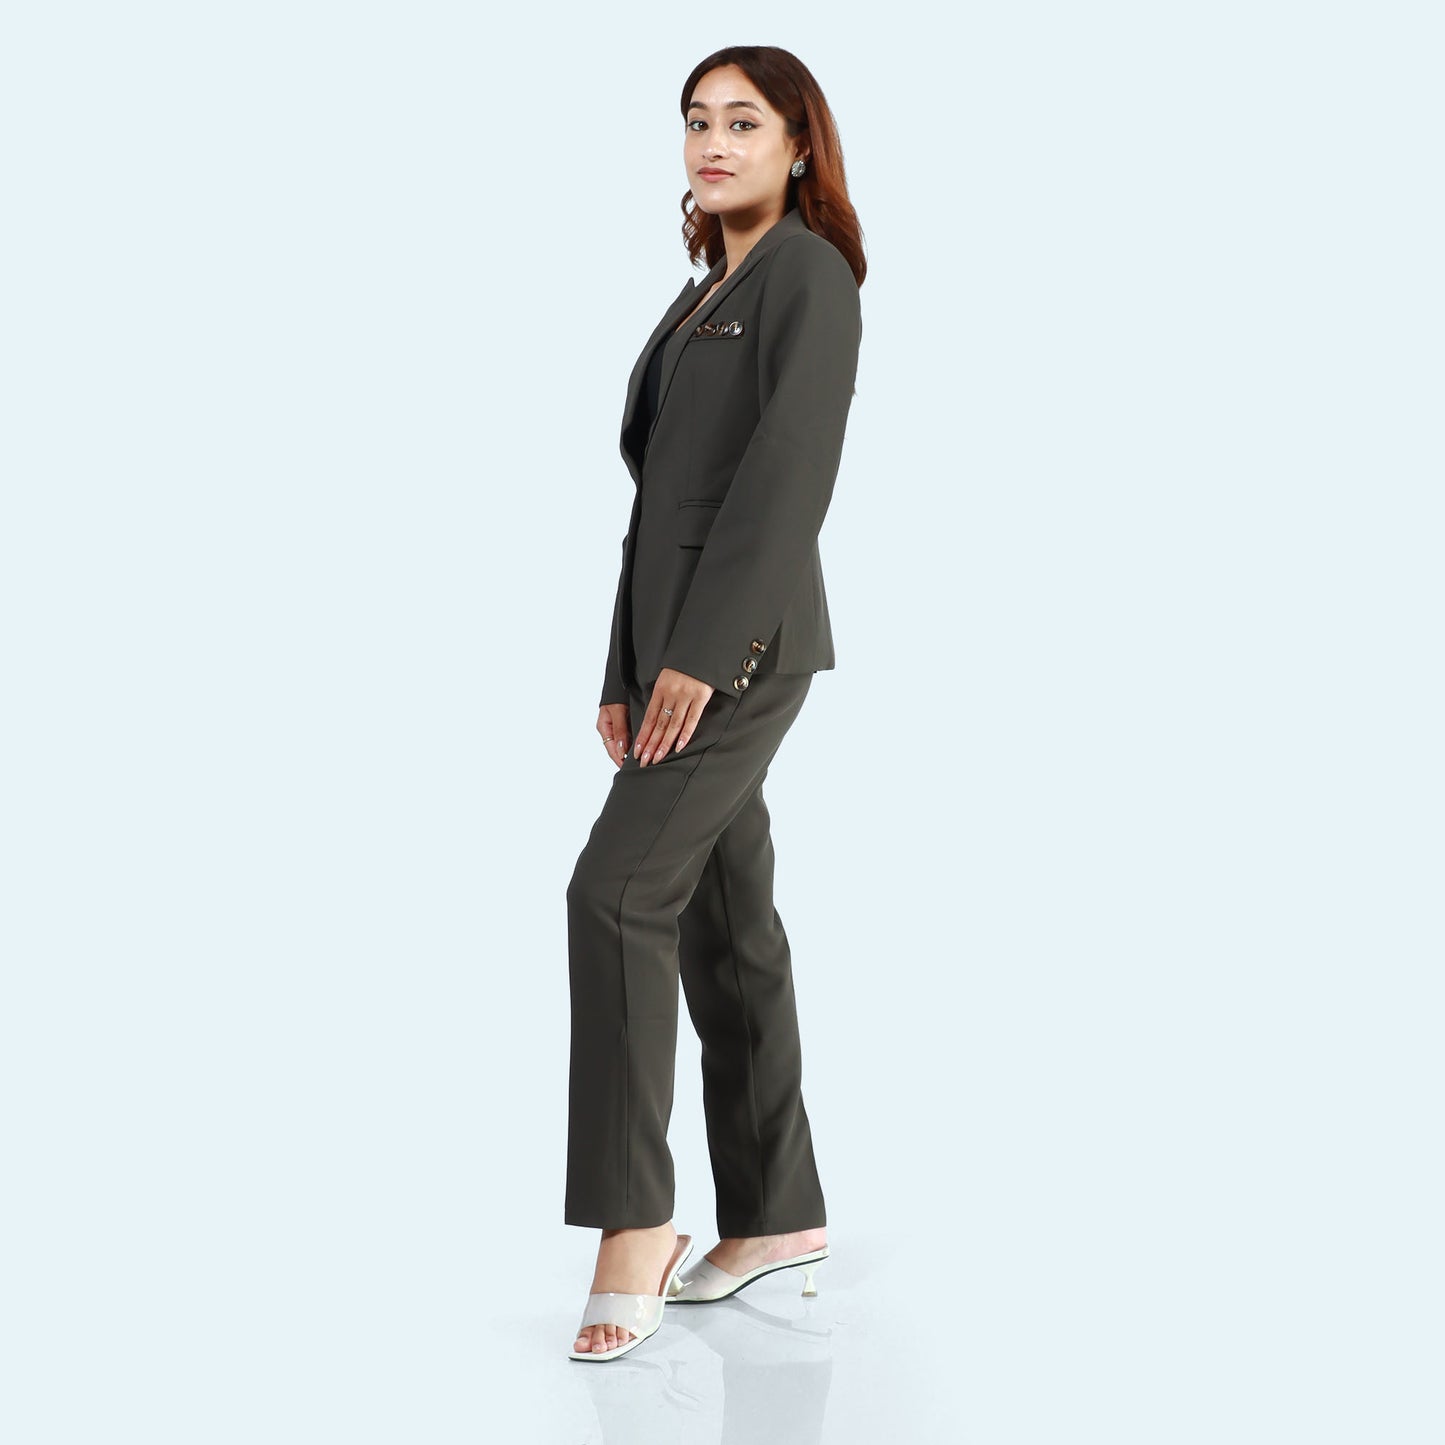 Grey Single Button Formal Coat And Pant Set For Women